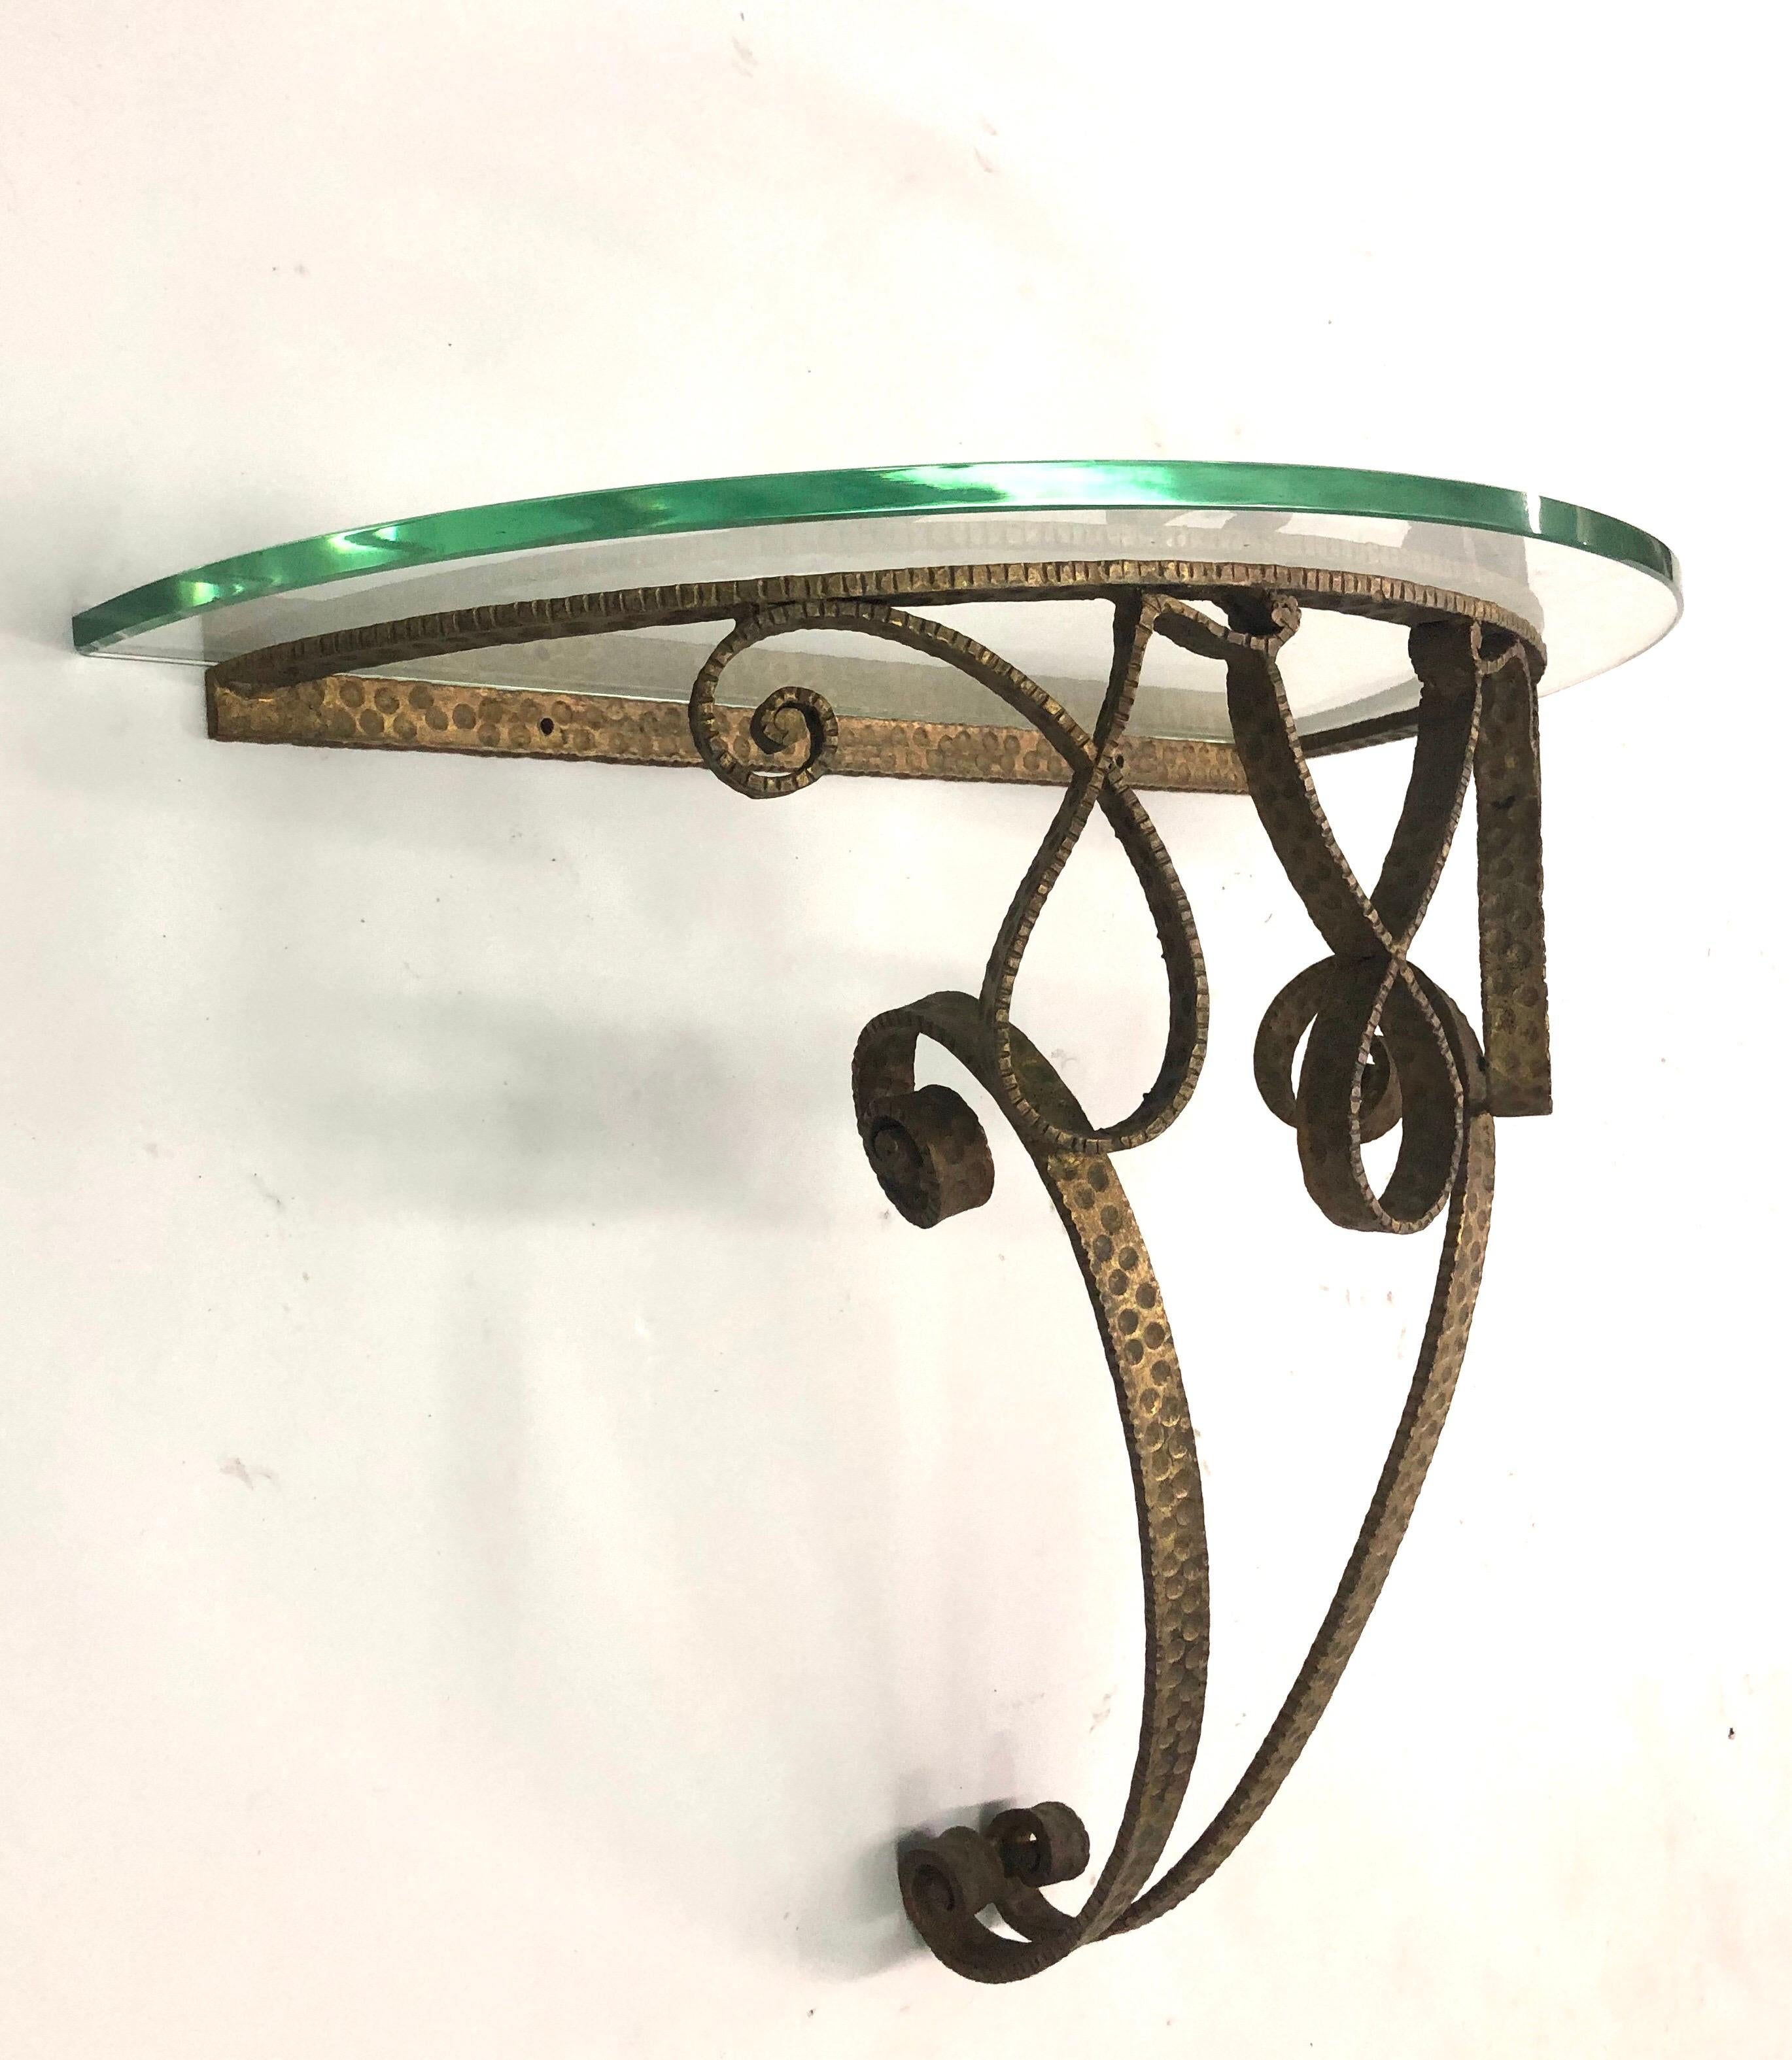 Italian Mid-Century Modern neoclassical gilt wrought iron demilune wall console by Pierluigi Colli. the iron is hand hammered.

Glass top rests on the iron base; stone or material of choice can easily be substituted. Iron Base dimensions only: H